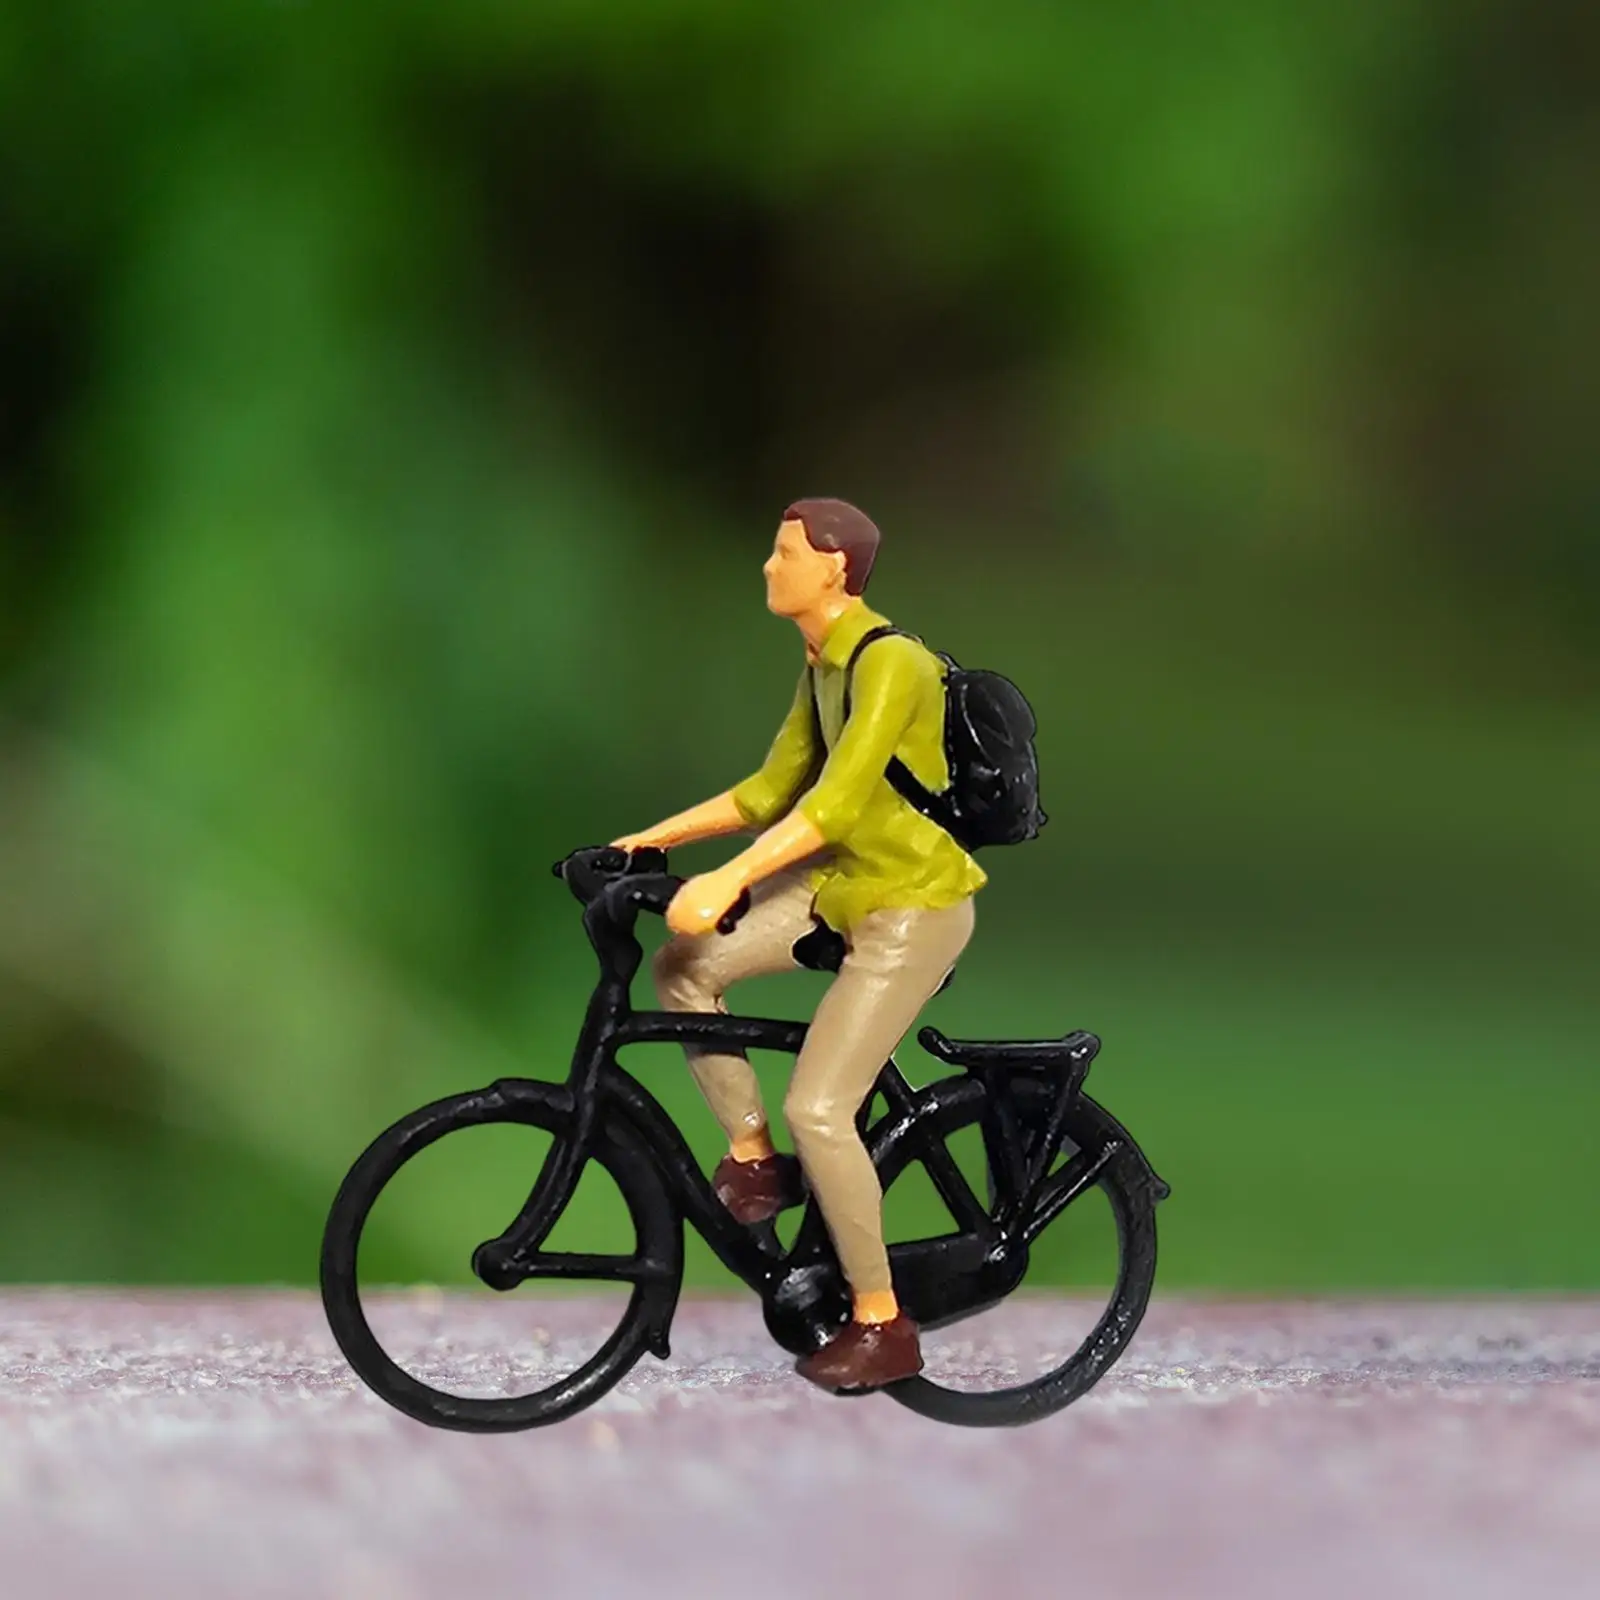 1/87 Scale Cyclist Figures Mini People Model Ornament for Dollhouse DIY Projects Layout